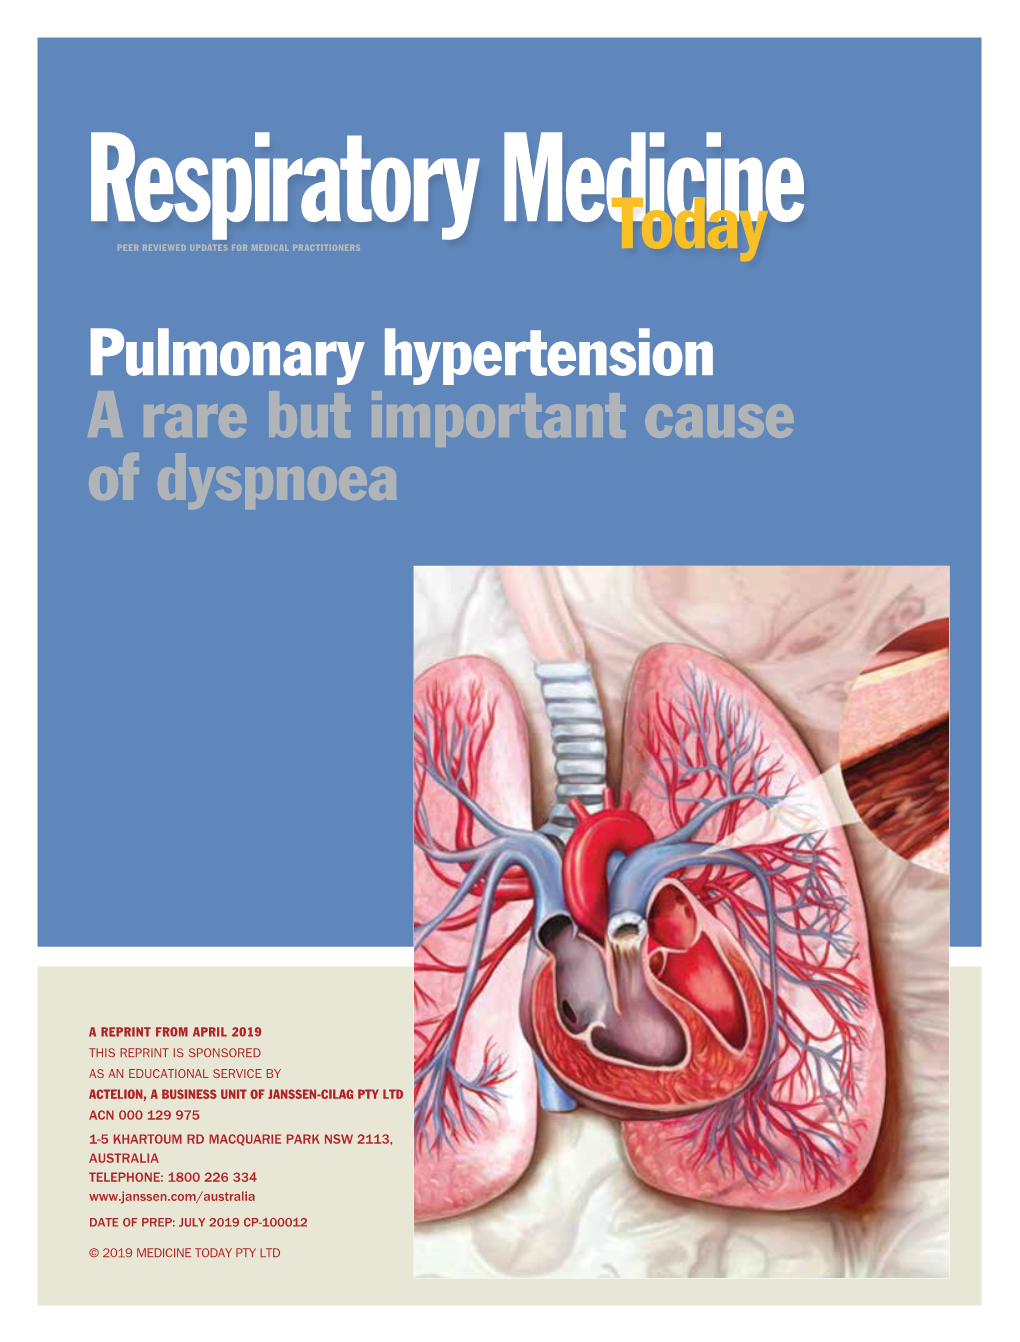 Pulmonary Hypertension a Rare but Important Cause of Dyspnoea